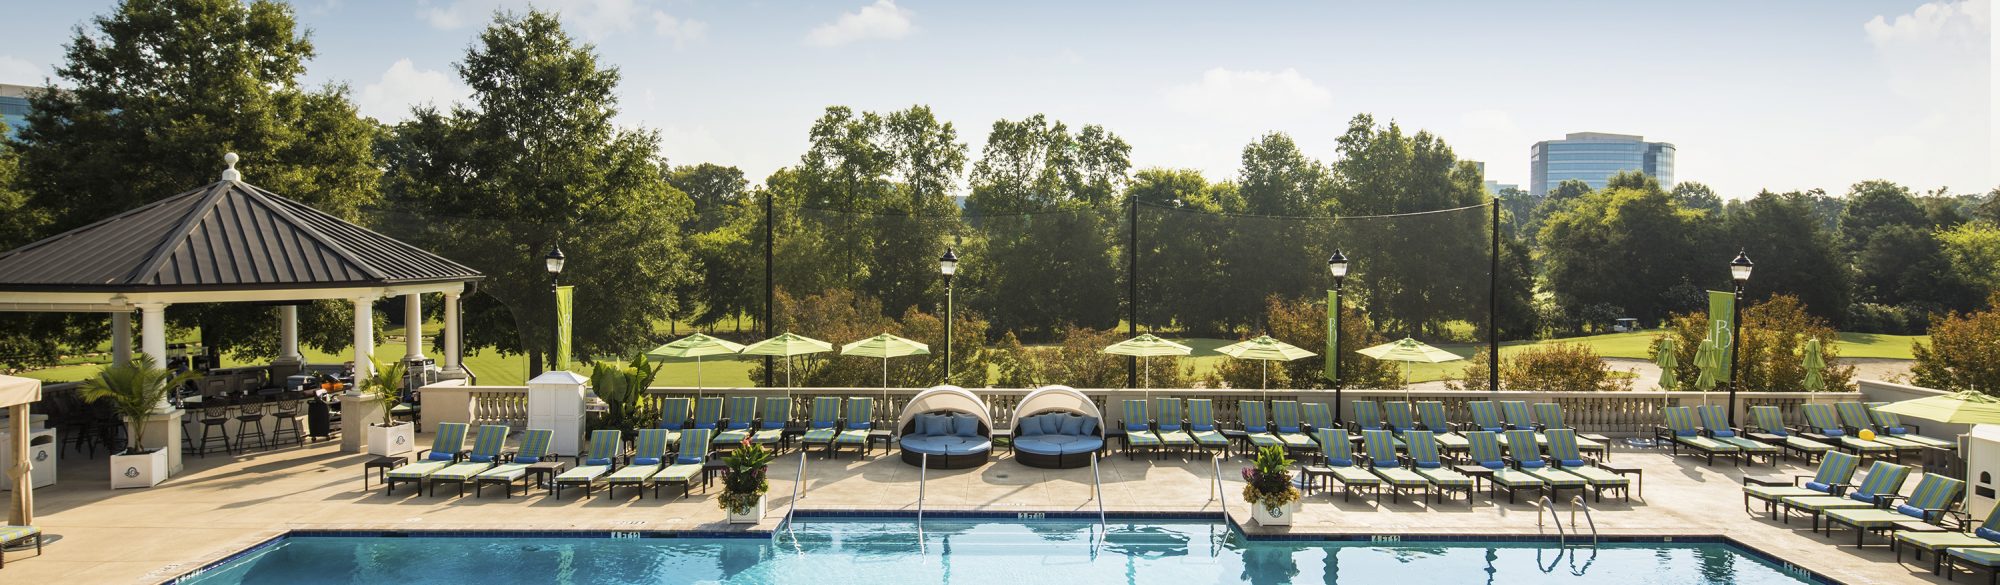 Outdoor Pool at The Ballantyne Hotel, Charlotte